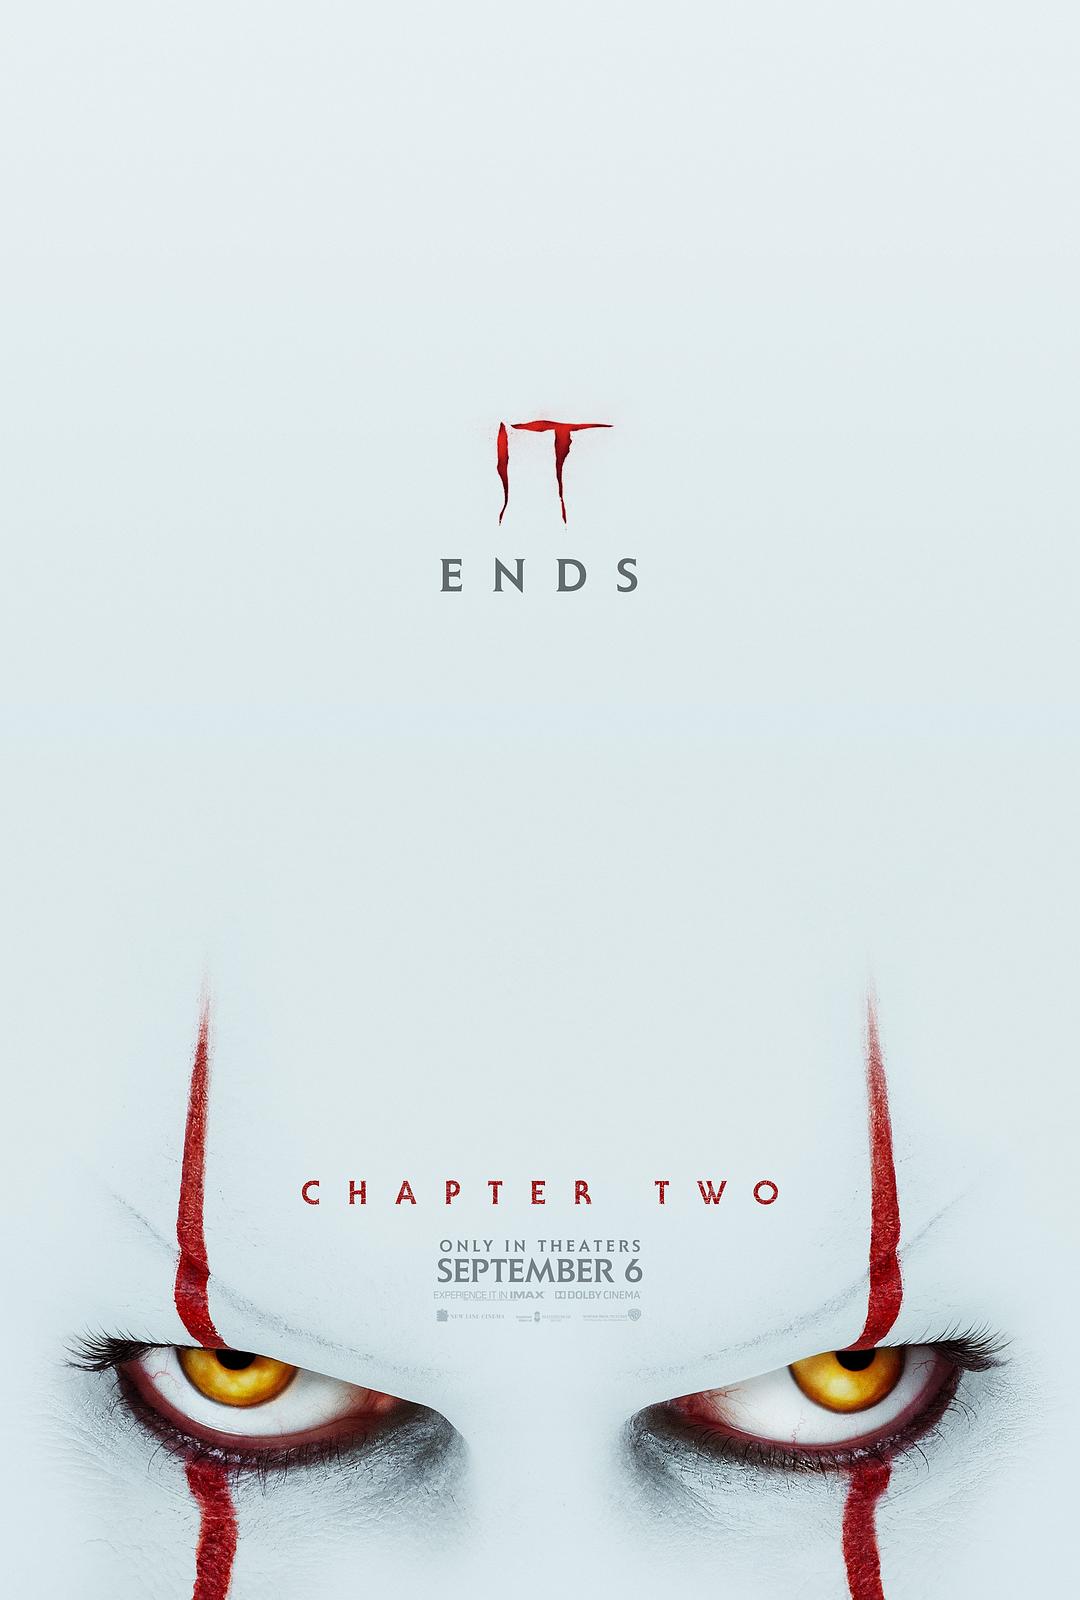 Сػ2 It.Chapter.Two.2019.720p.BluRay.x264-DRONES 6.57GB-1.png